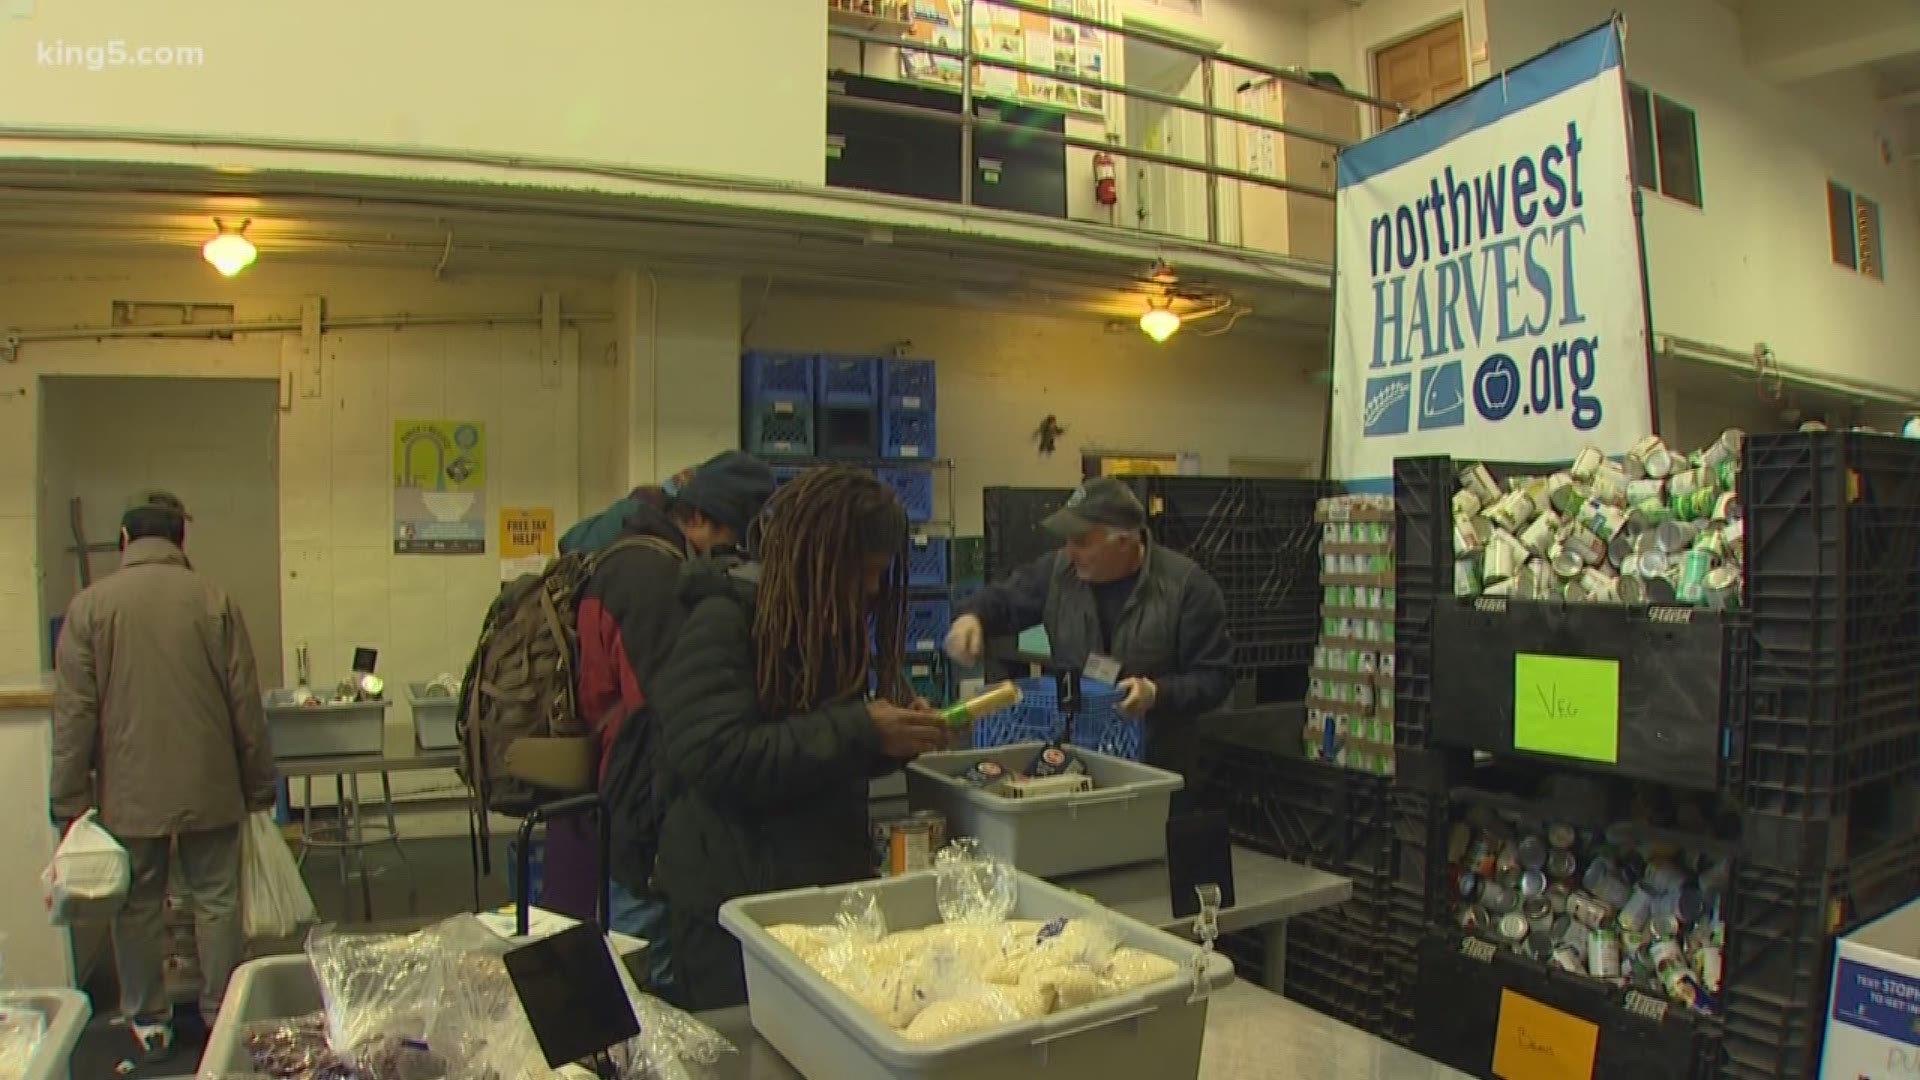 Northwest Harvest is one of the many Washington food banks in need of extra donations during the partial shutdown of the federal government. KING 5's Greg Copeland reports.